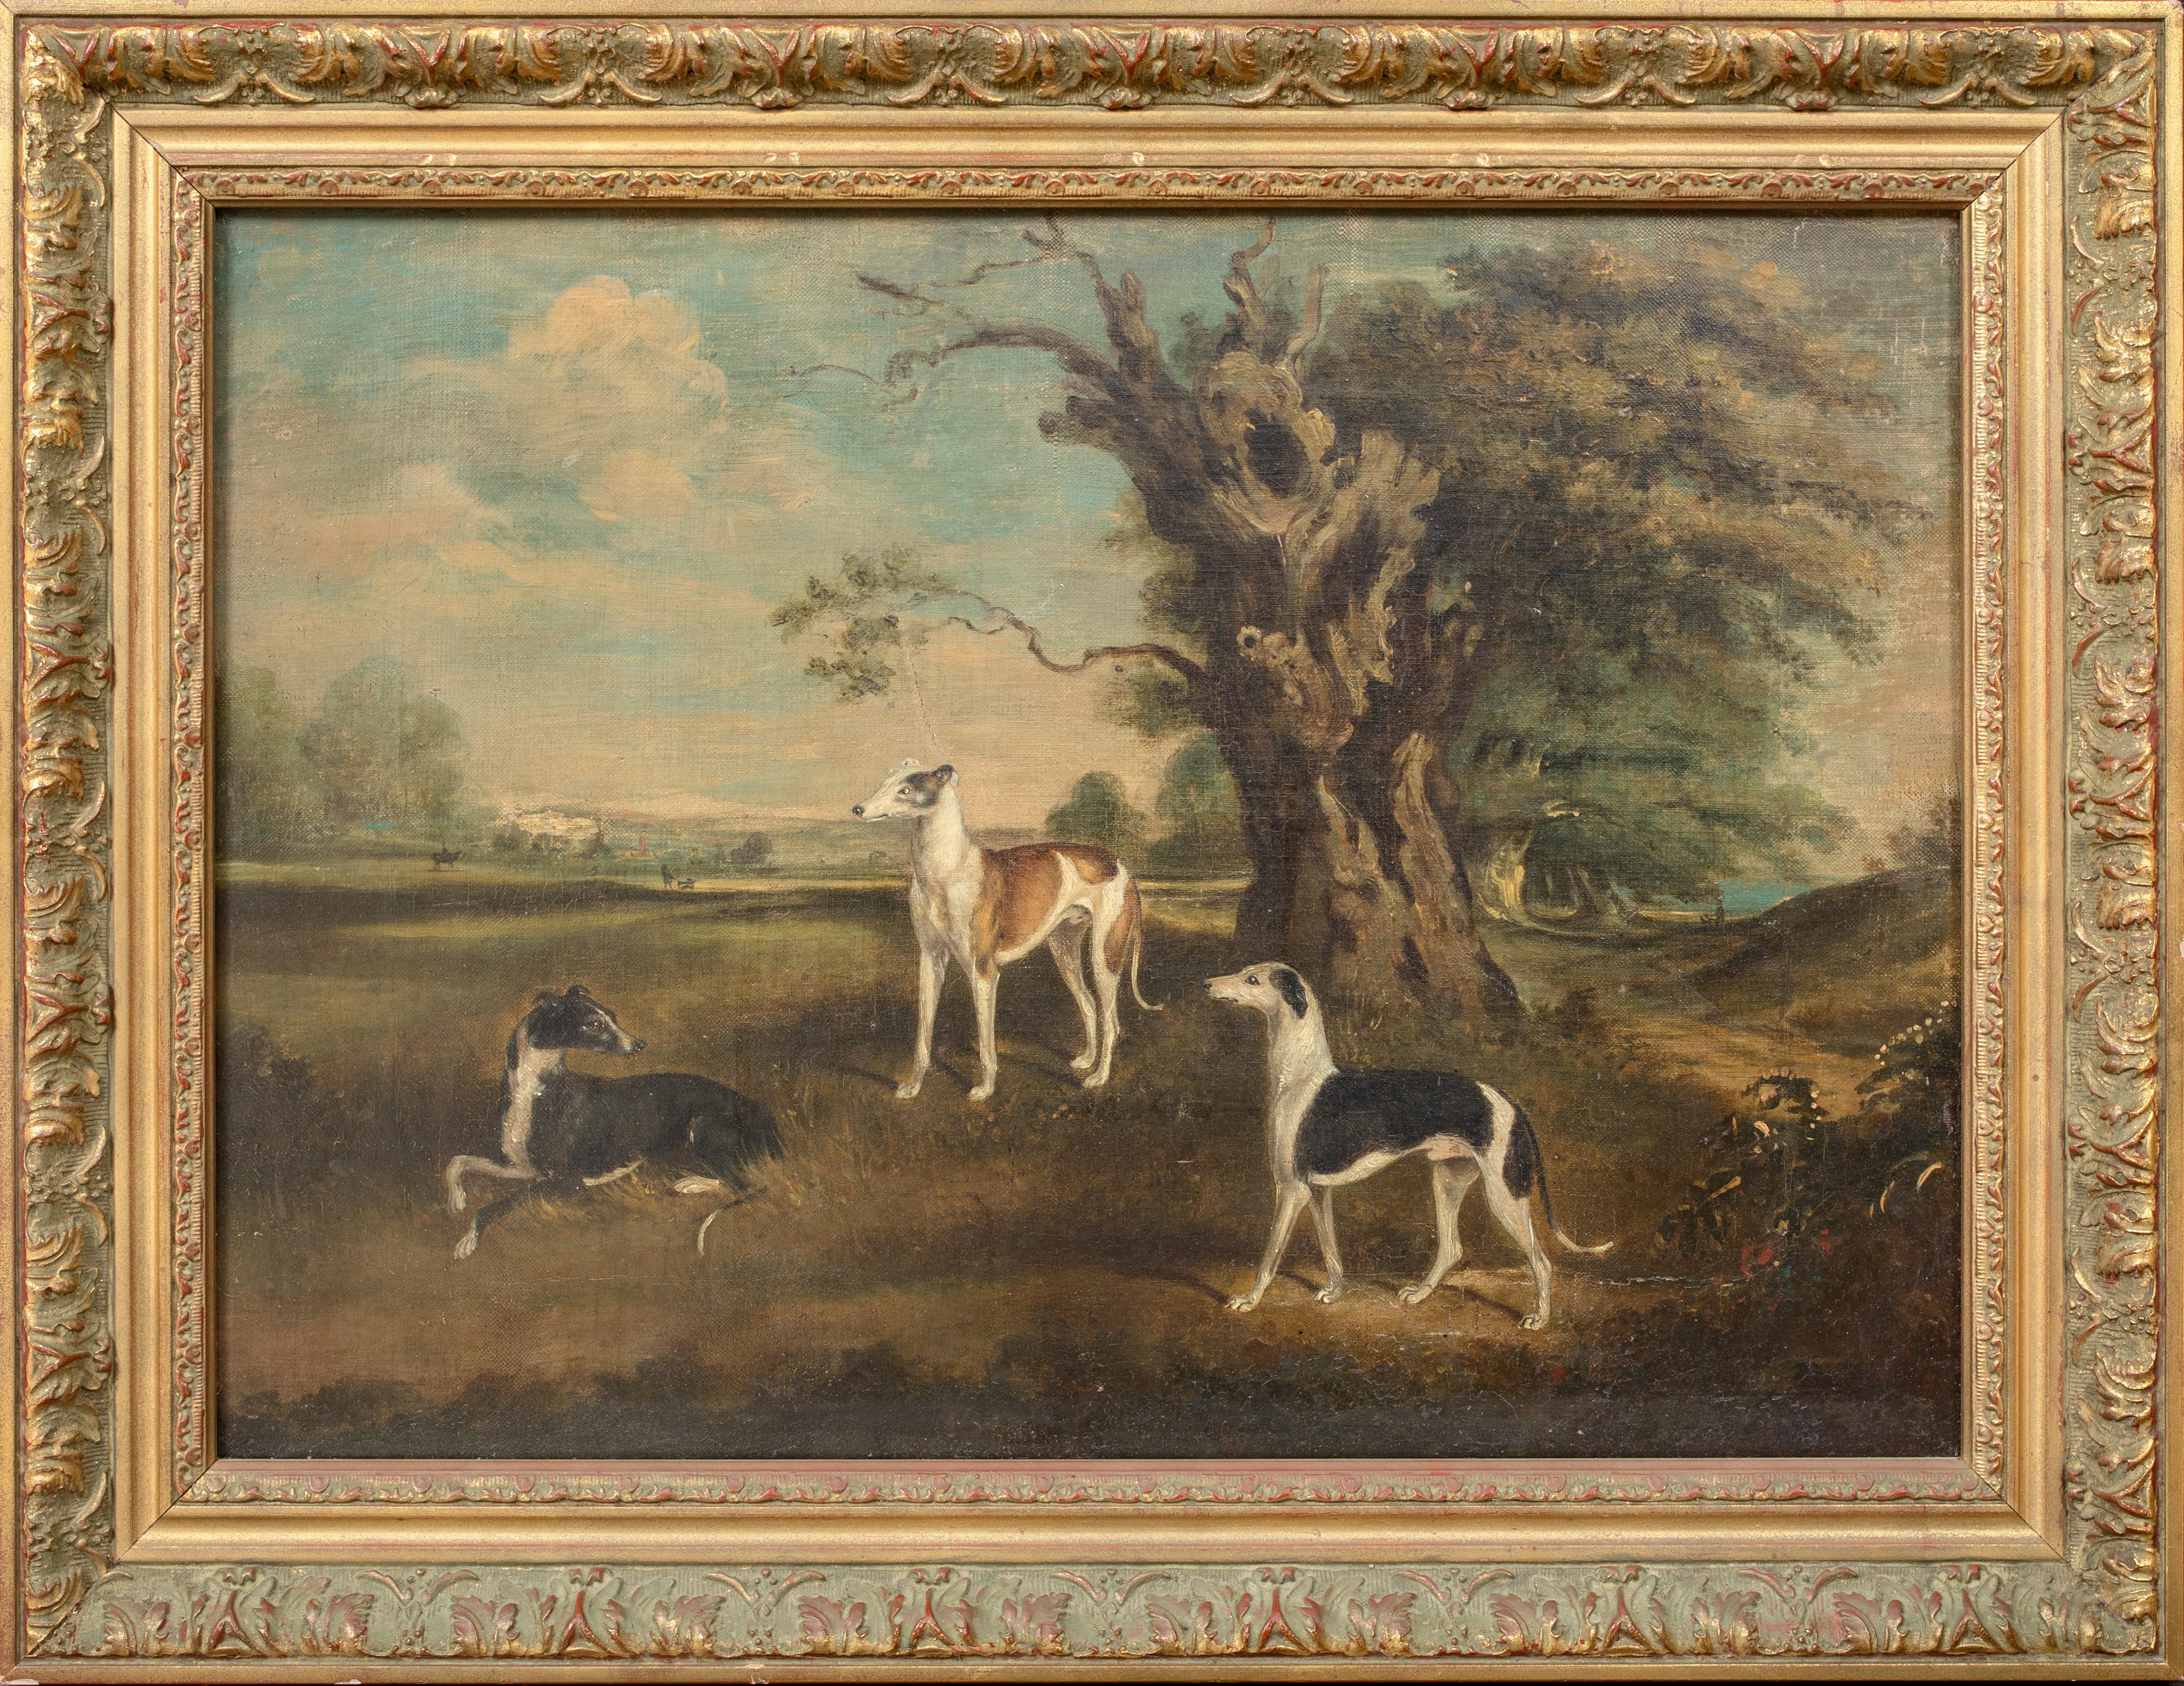 George Garrard Animal Painting - The Favourites Of The Earl Of Orford - 3 Greyhounds In A Landscape 18th Century